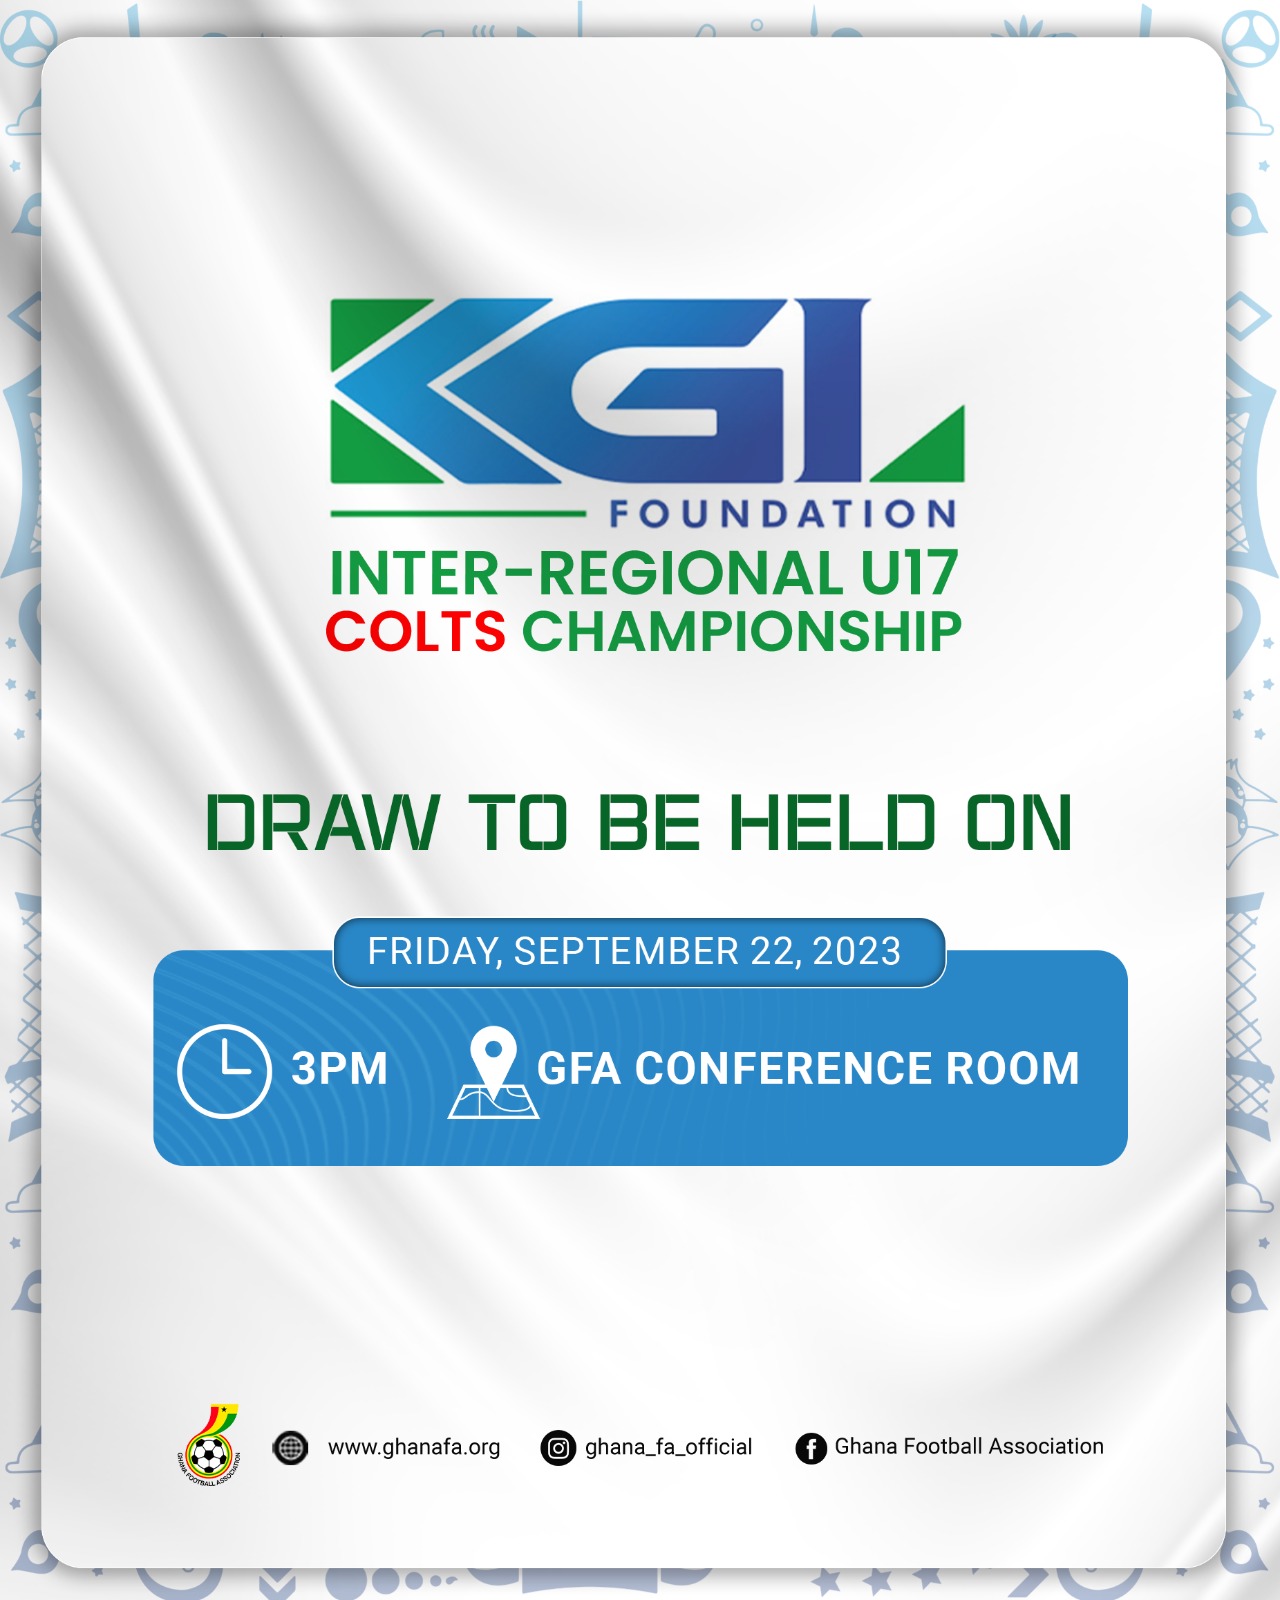 Draw for KGL Foundation Inter-regional U-17 Colts championship set for Friday